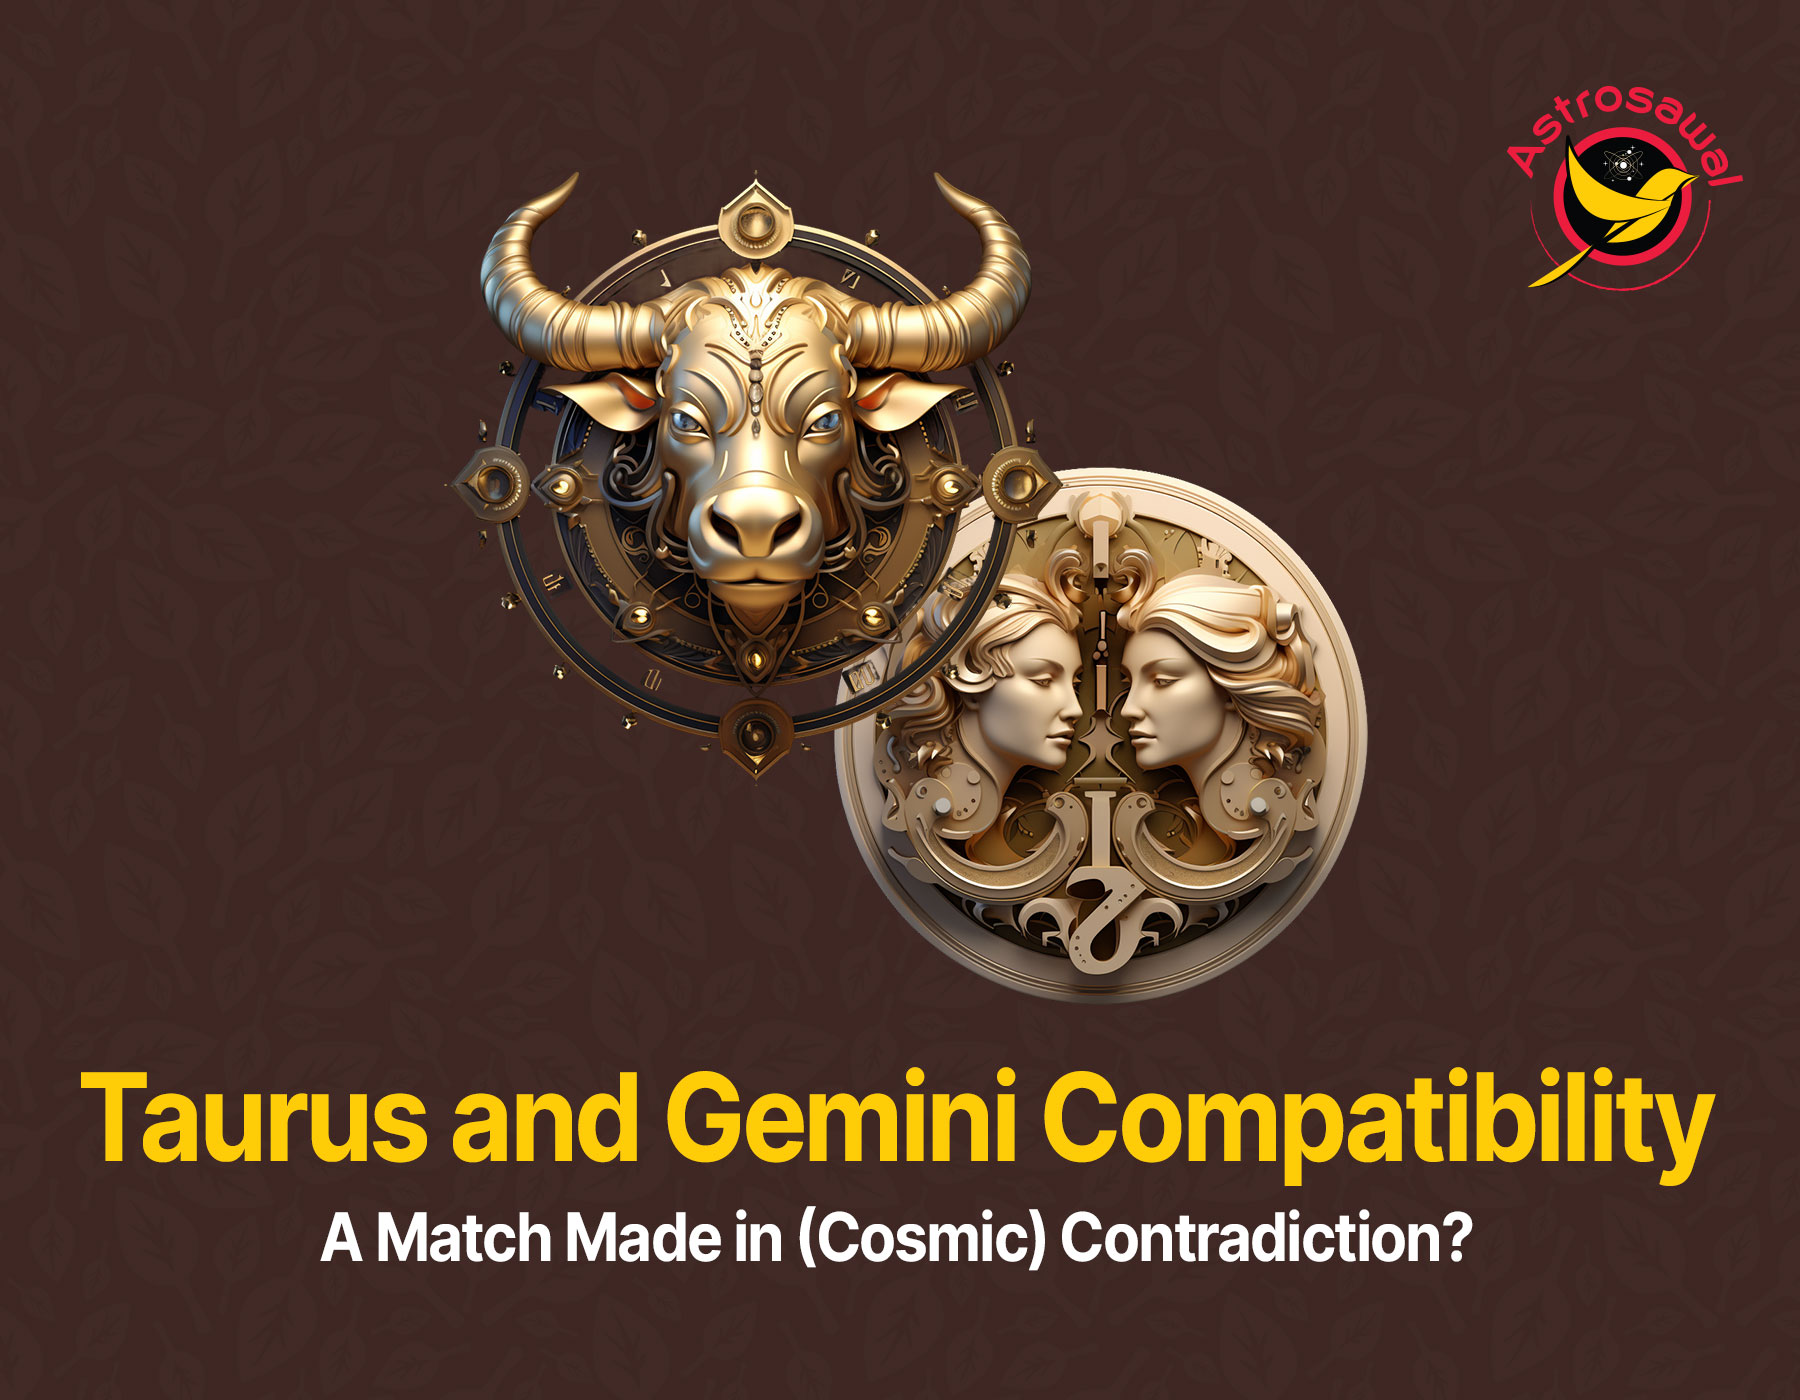 Taurus and Gemini Compatibility: A Match Made in (Cosmic) Contradiction?